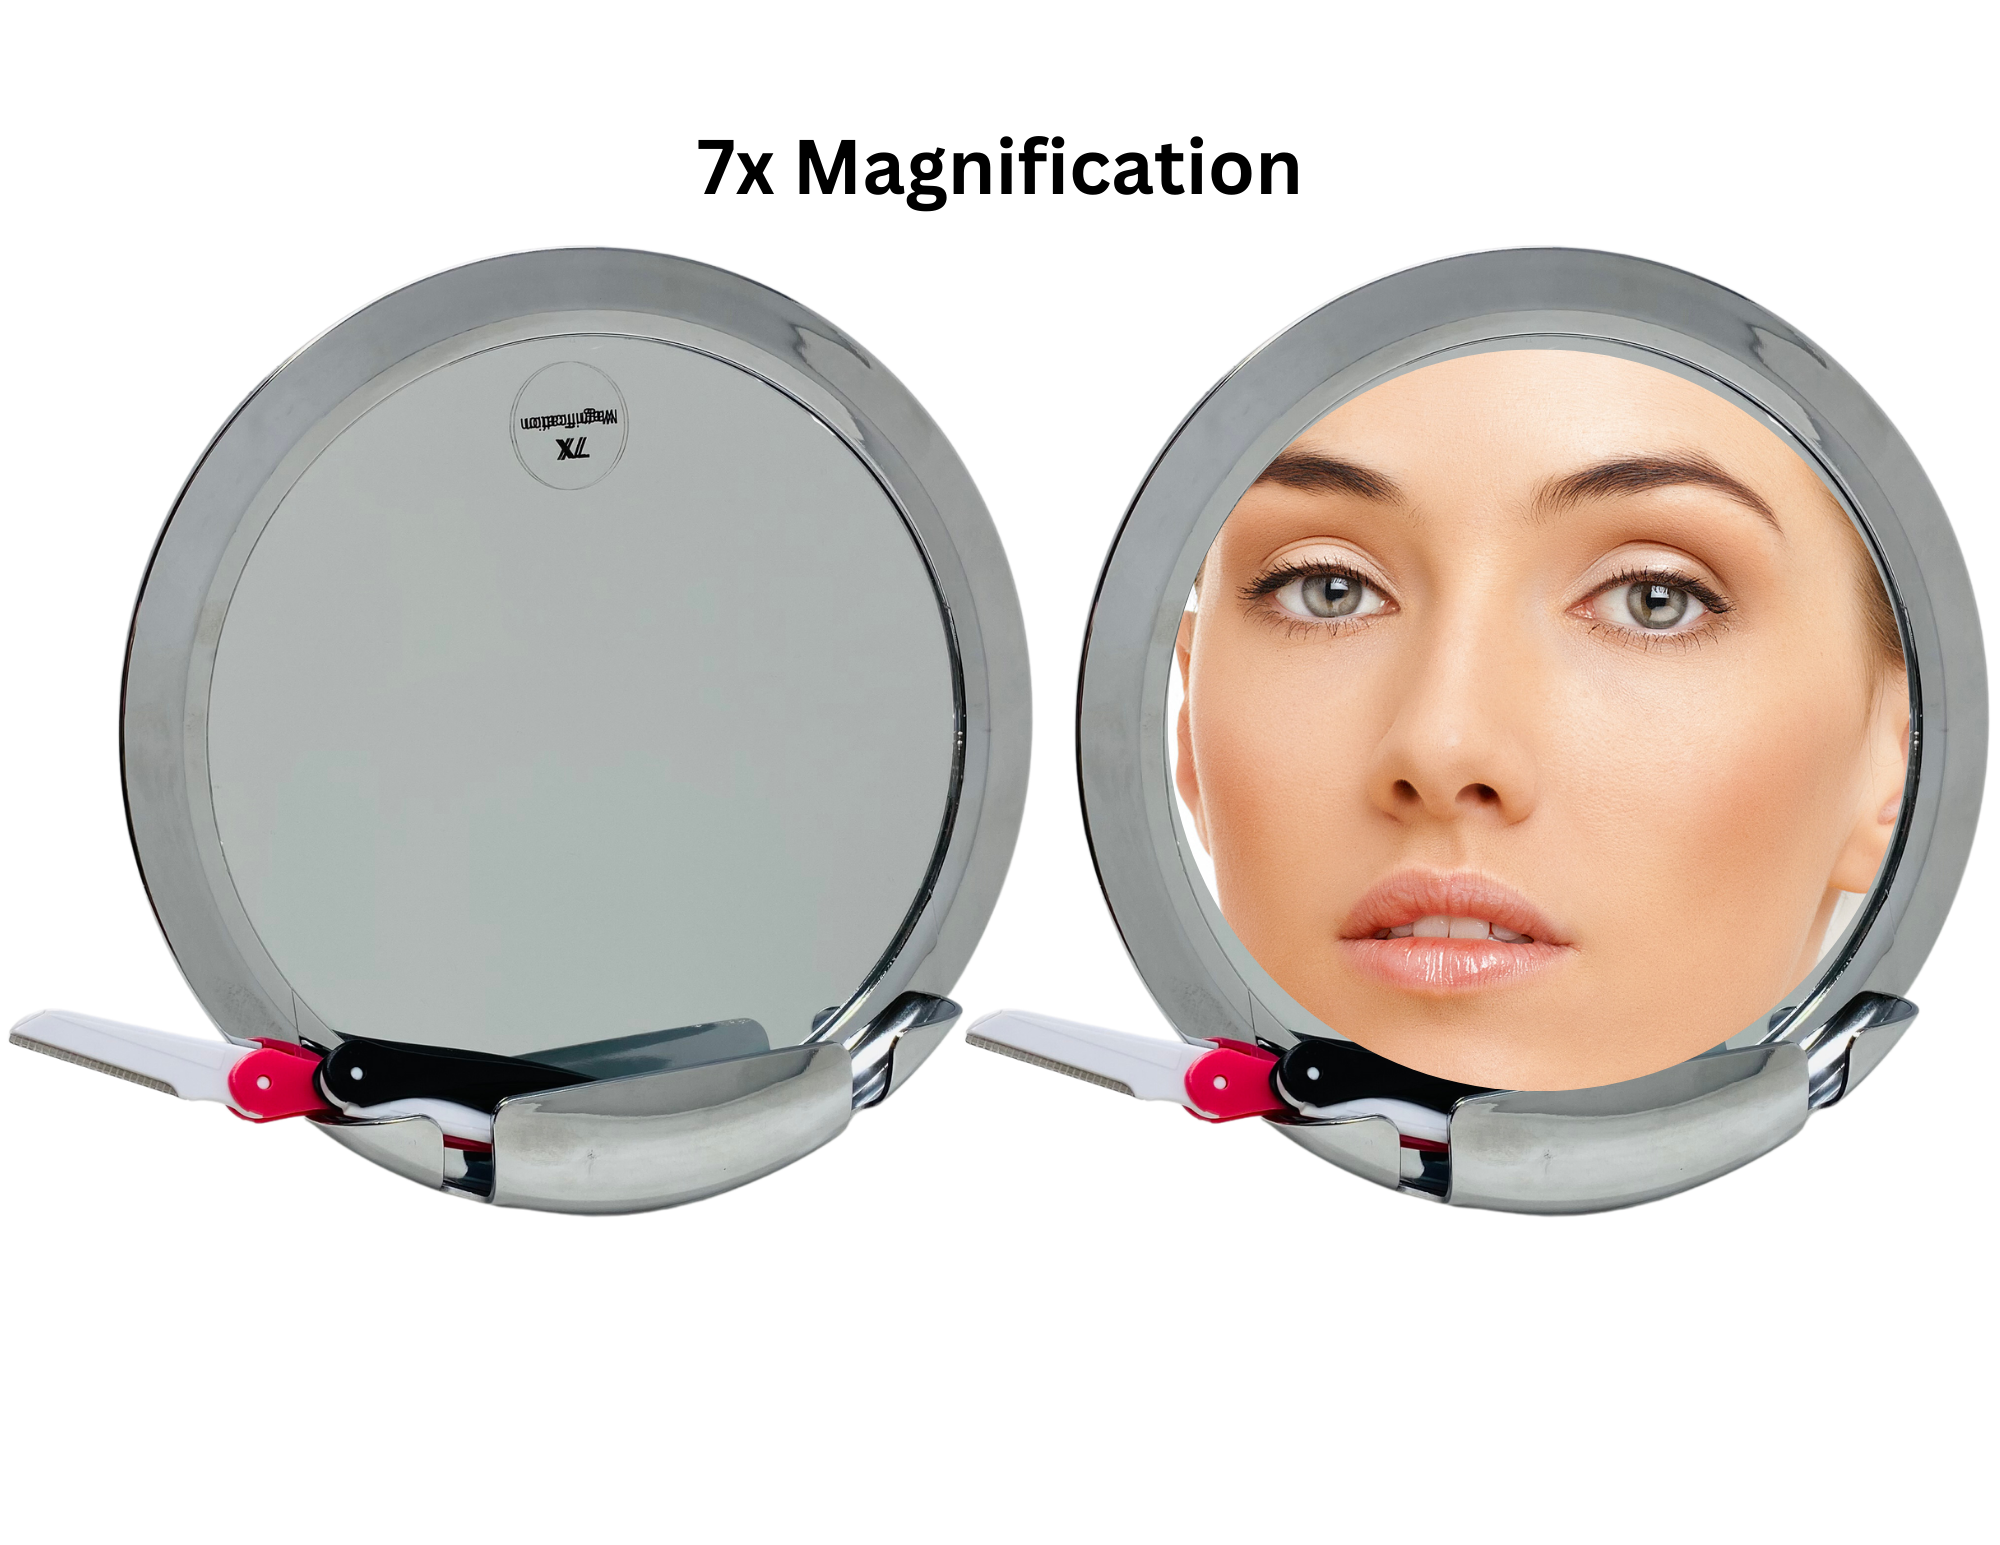 CLEARANCE 7X Magnification Shower Mirror for Shaving (6.5"D x 10.5"H)